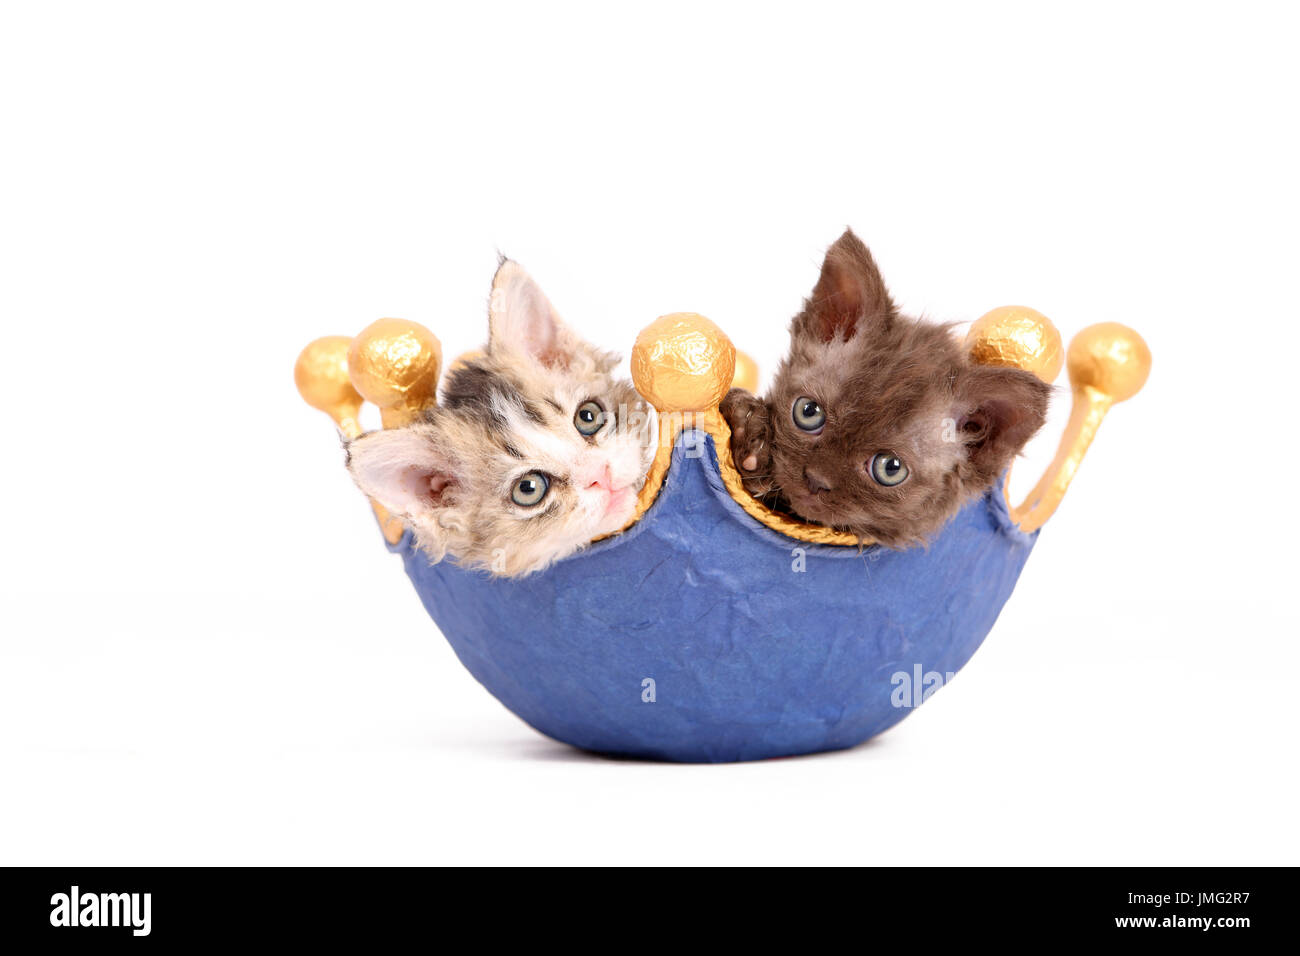 Selkirk Rex. Pair of kittens (6 weeks old) in a dish, shaped like a crown. Studio picture against a white background. Germany Stock Photo